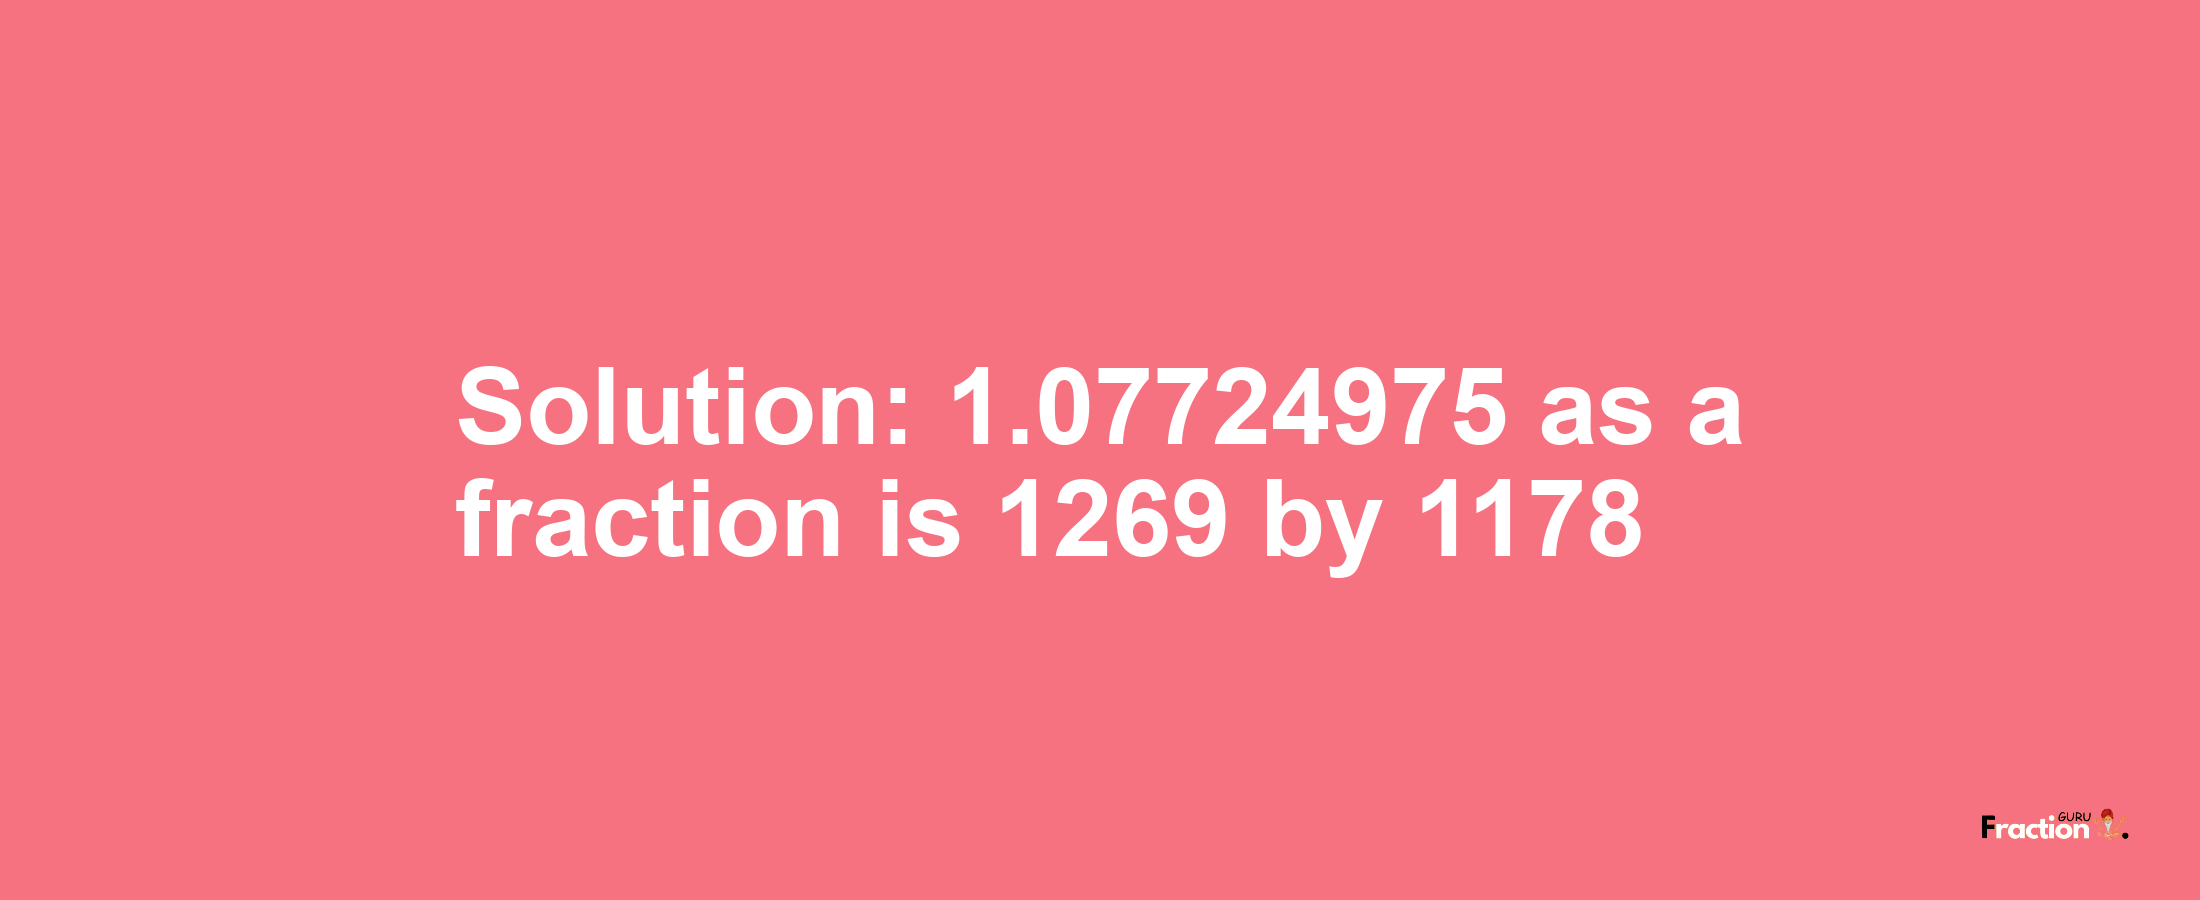 Solution:1.07724975 as a fraction is 1269/1178